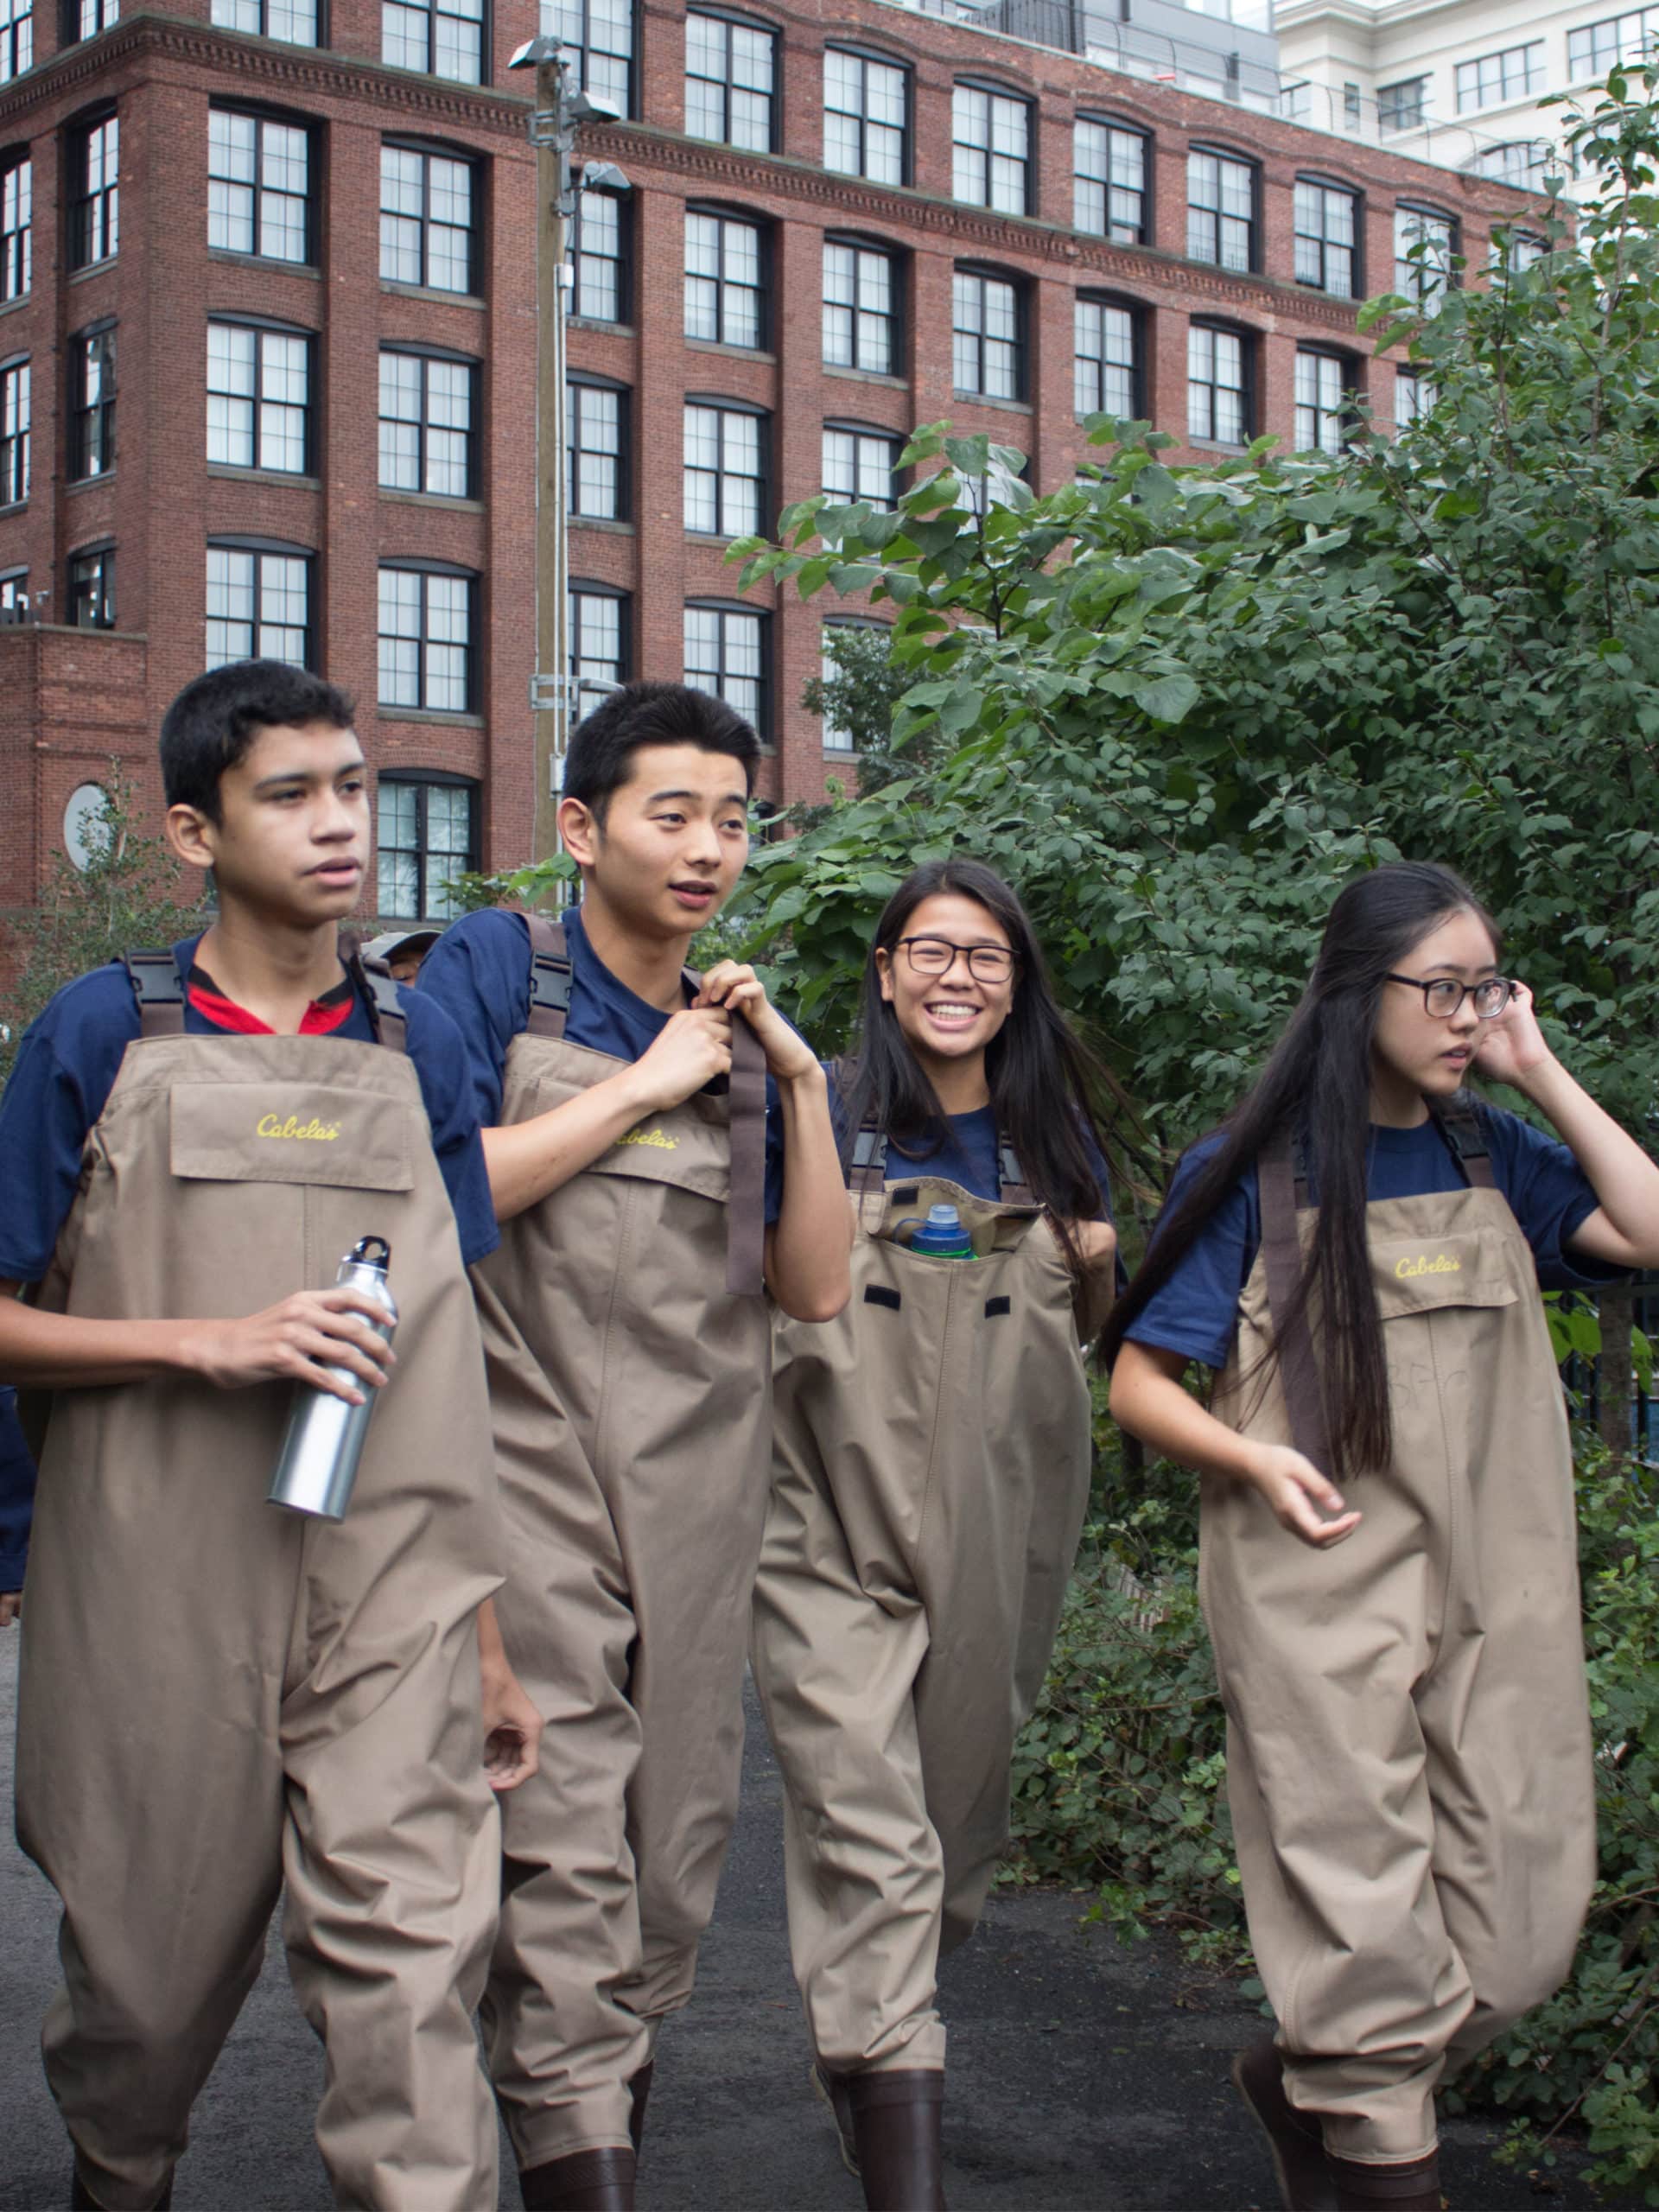 Group of teens in waders on a pathway.